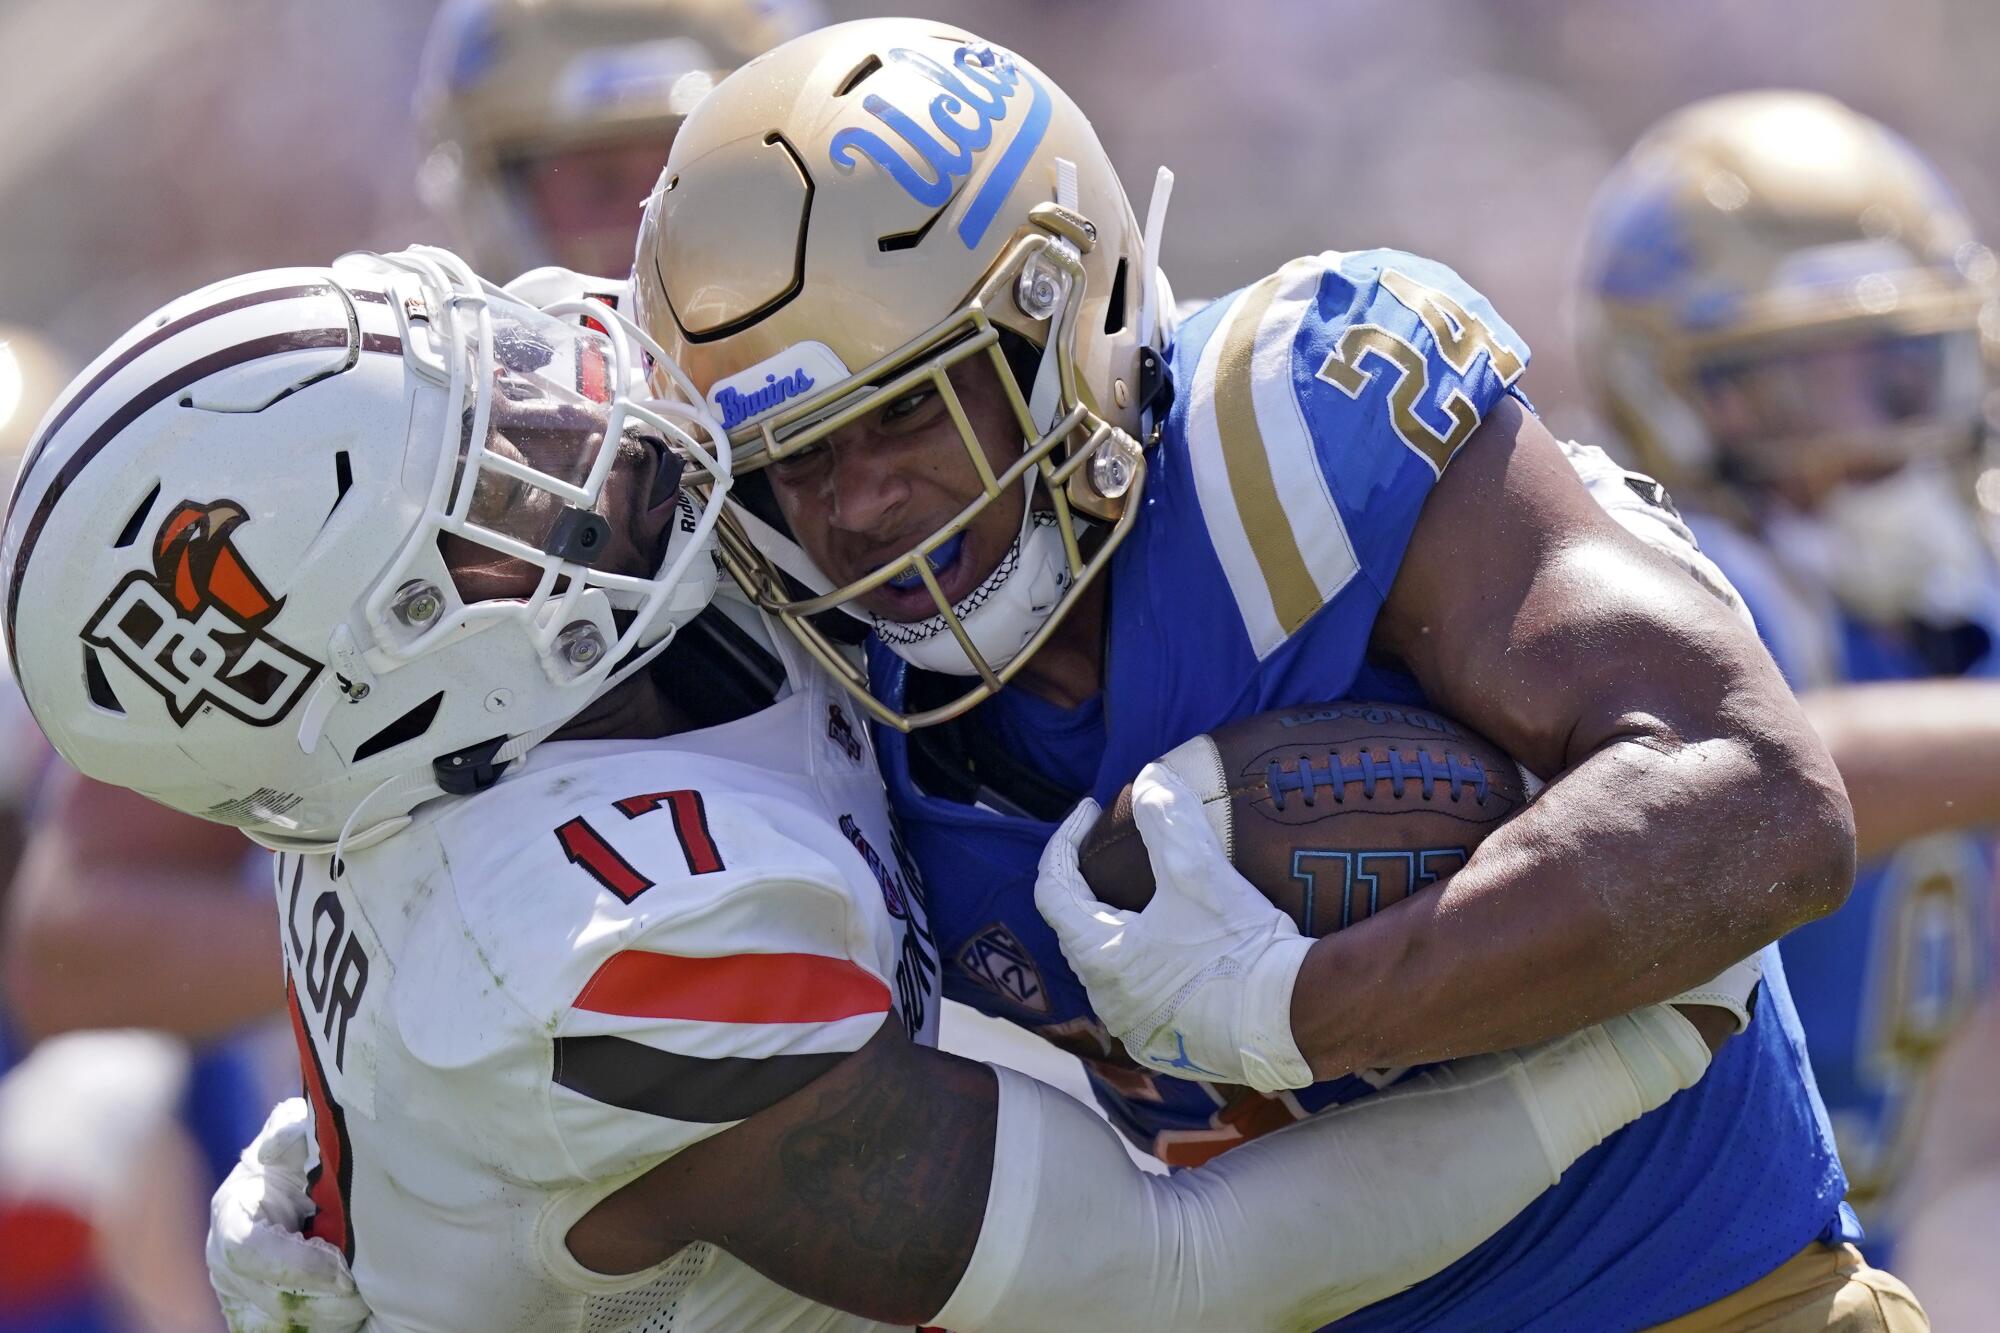 UCLA running back Zach Charbonnet is tackled by Bowling Green linebacker DJ Taylor.